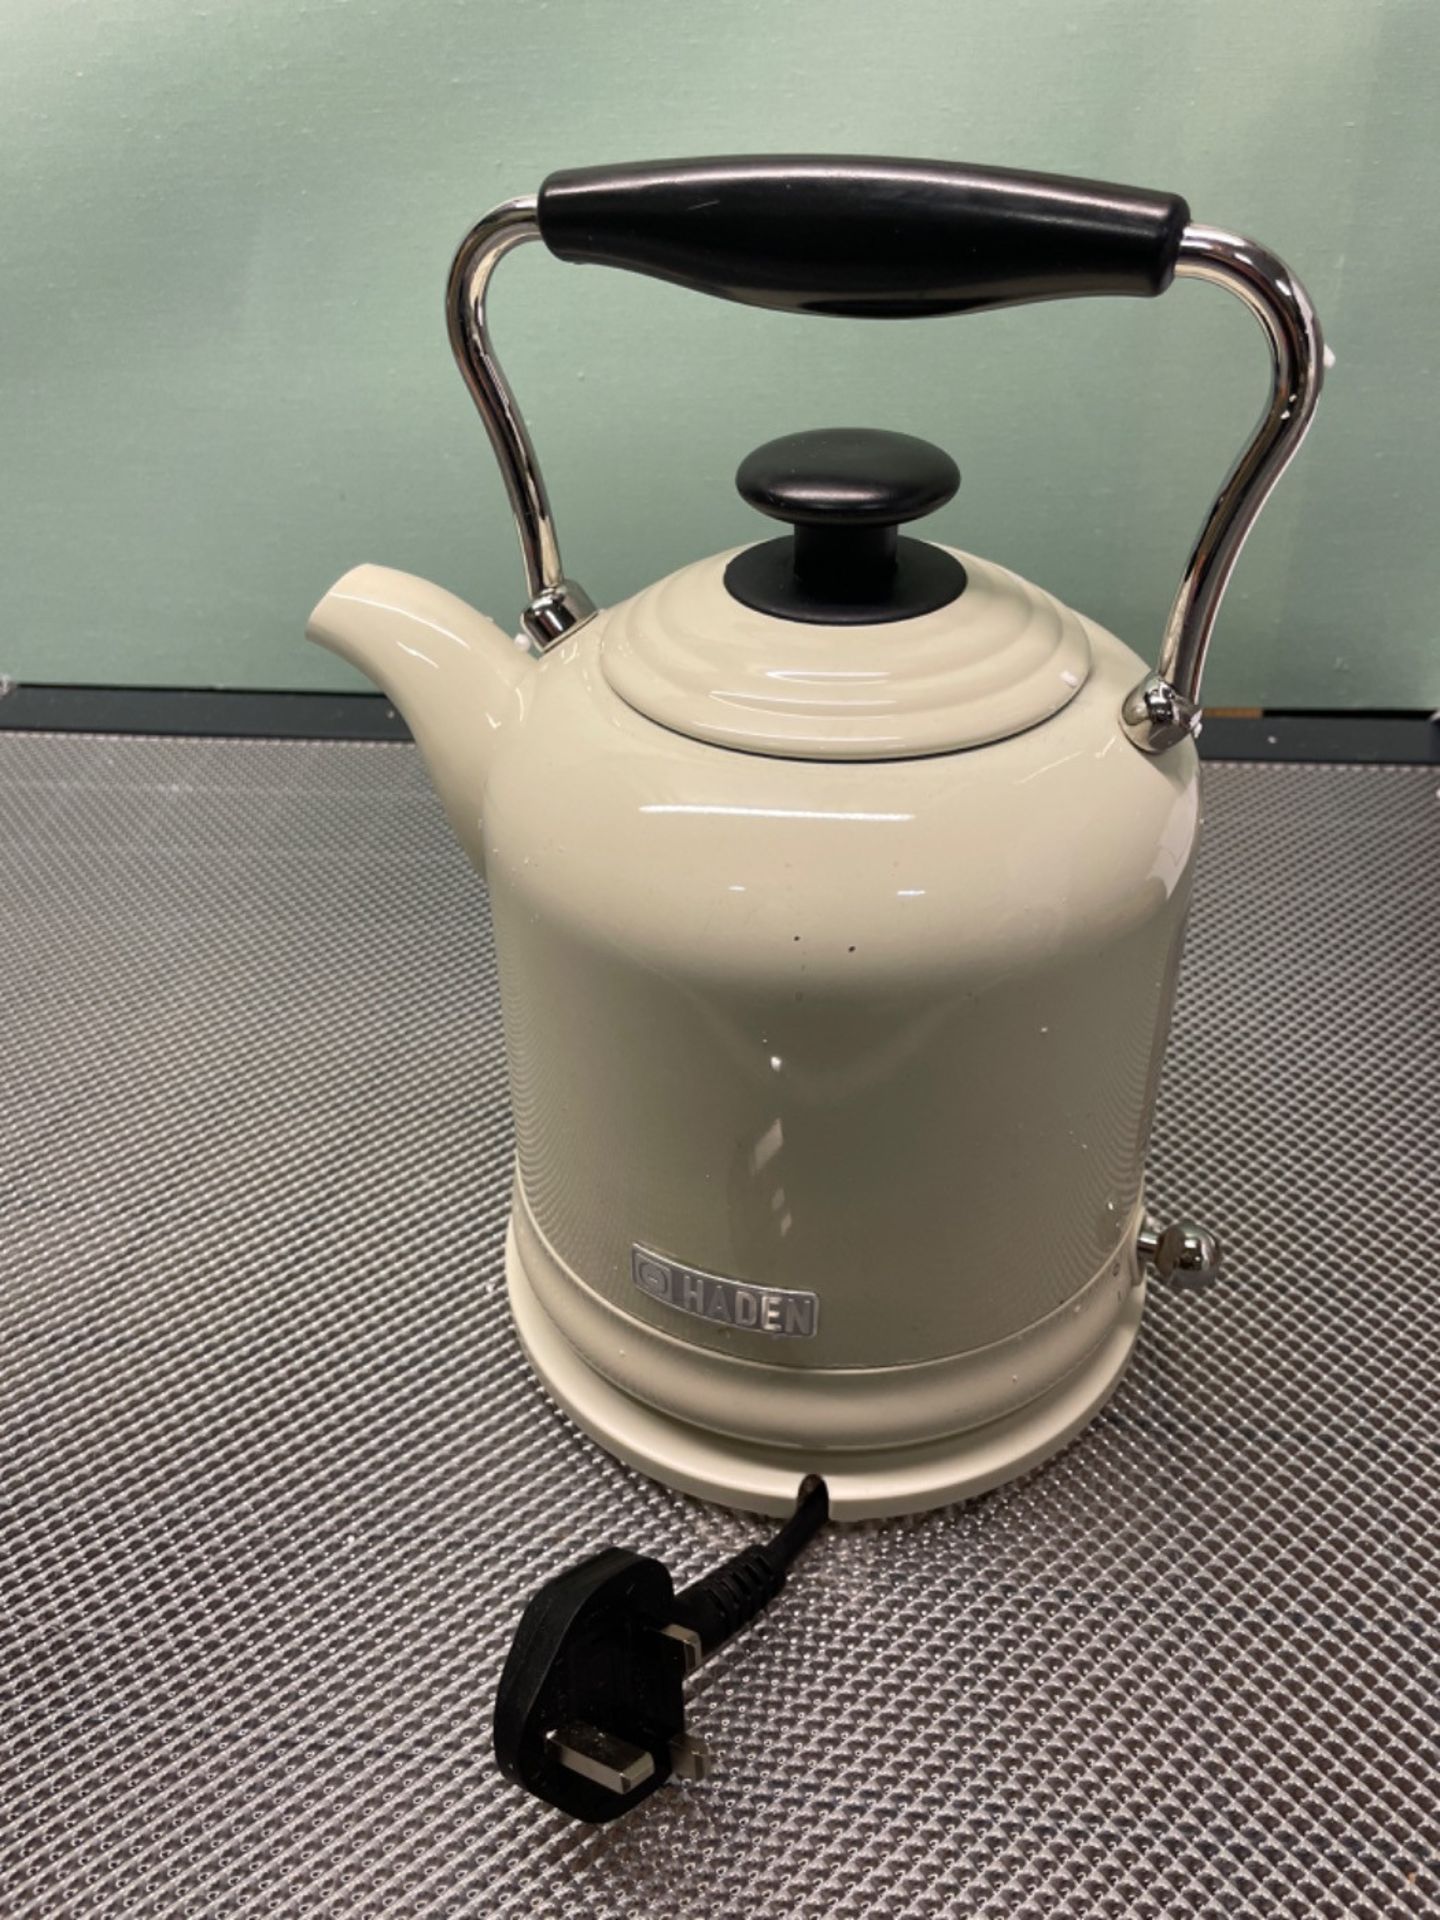 Haden Highclere Cream Kettle - 3000W Fast Boil Stainless Steel Kettle, Cordless, 360 Base, Cup Mark - Image 3 of 3